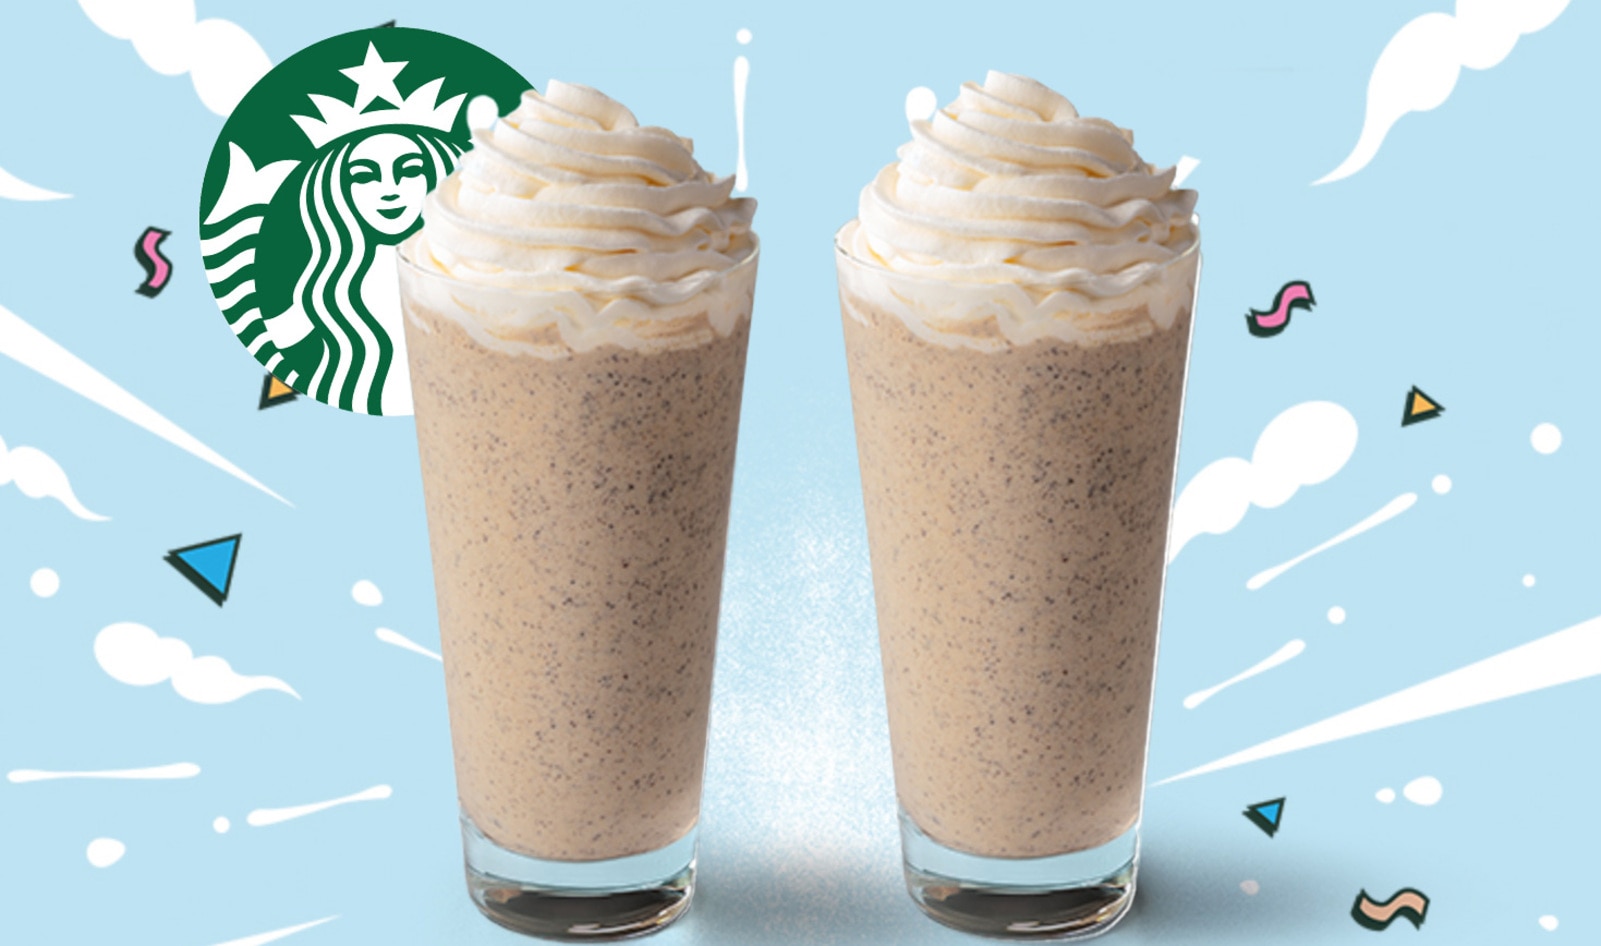 Starbucks UK Launches a Peanut Butter Cup Frappuccino and Ordering It Vegan Is Easy